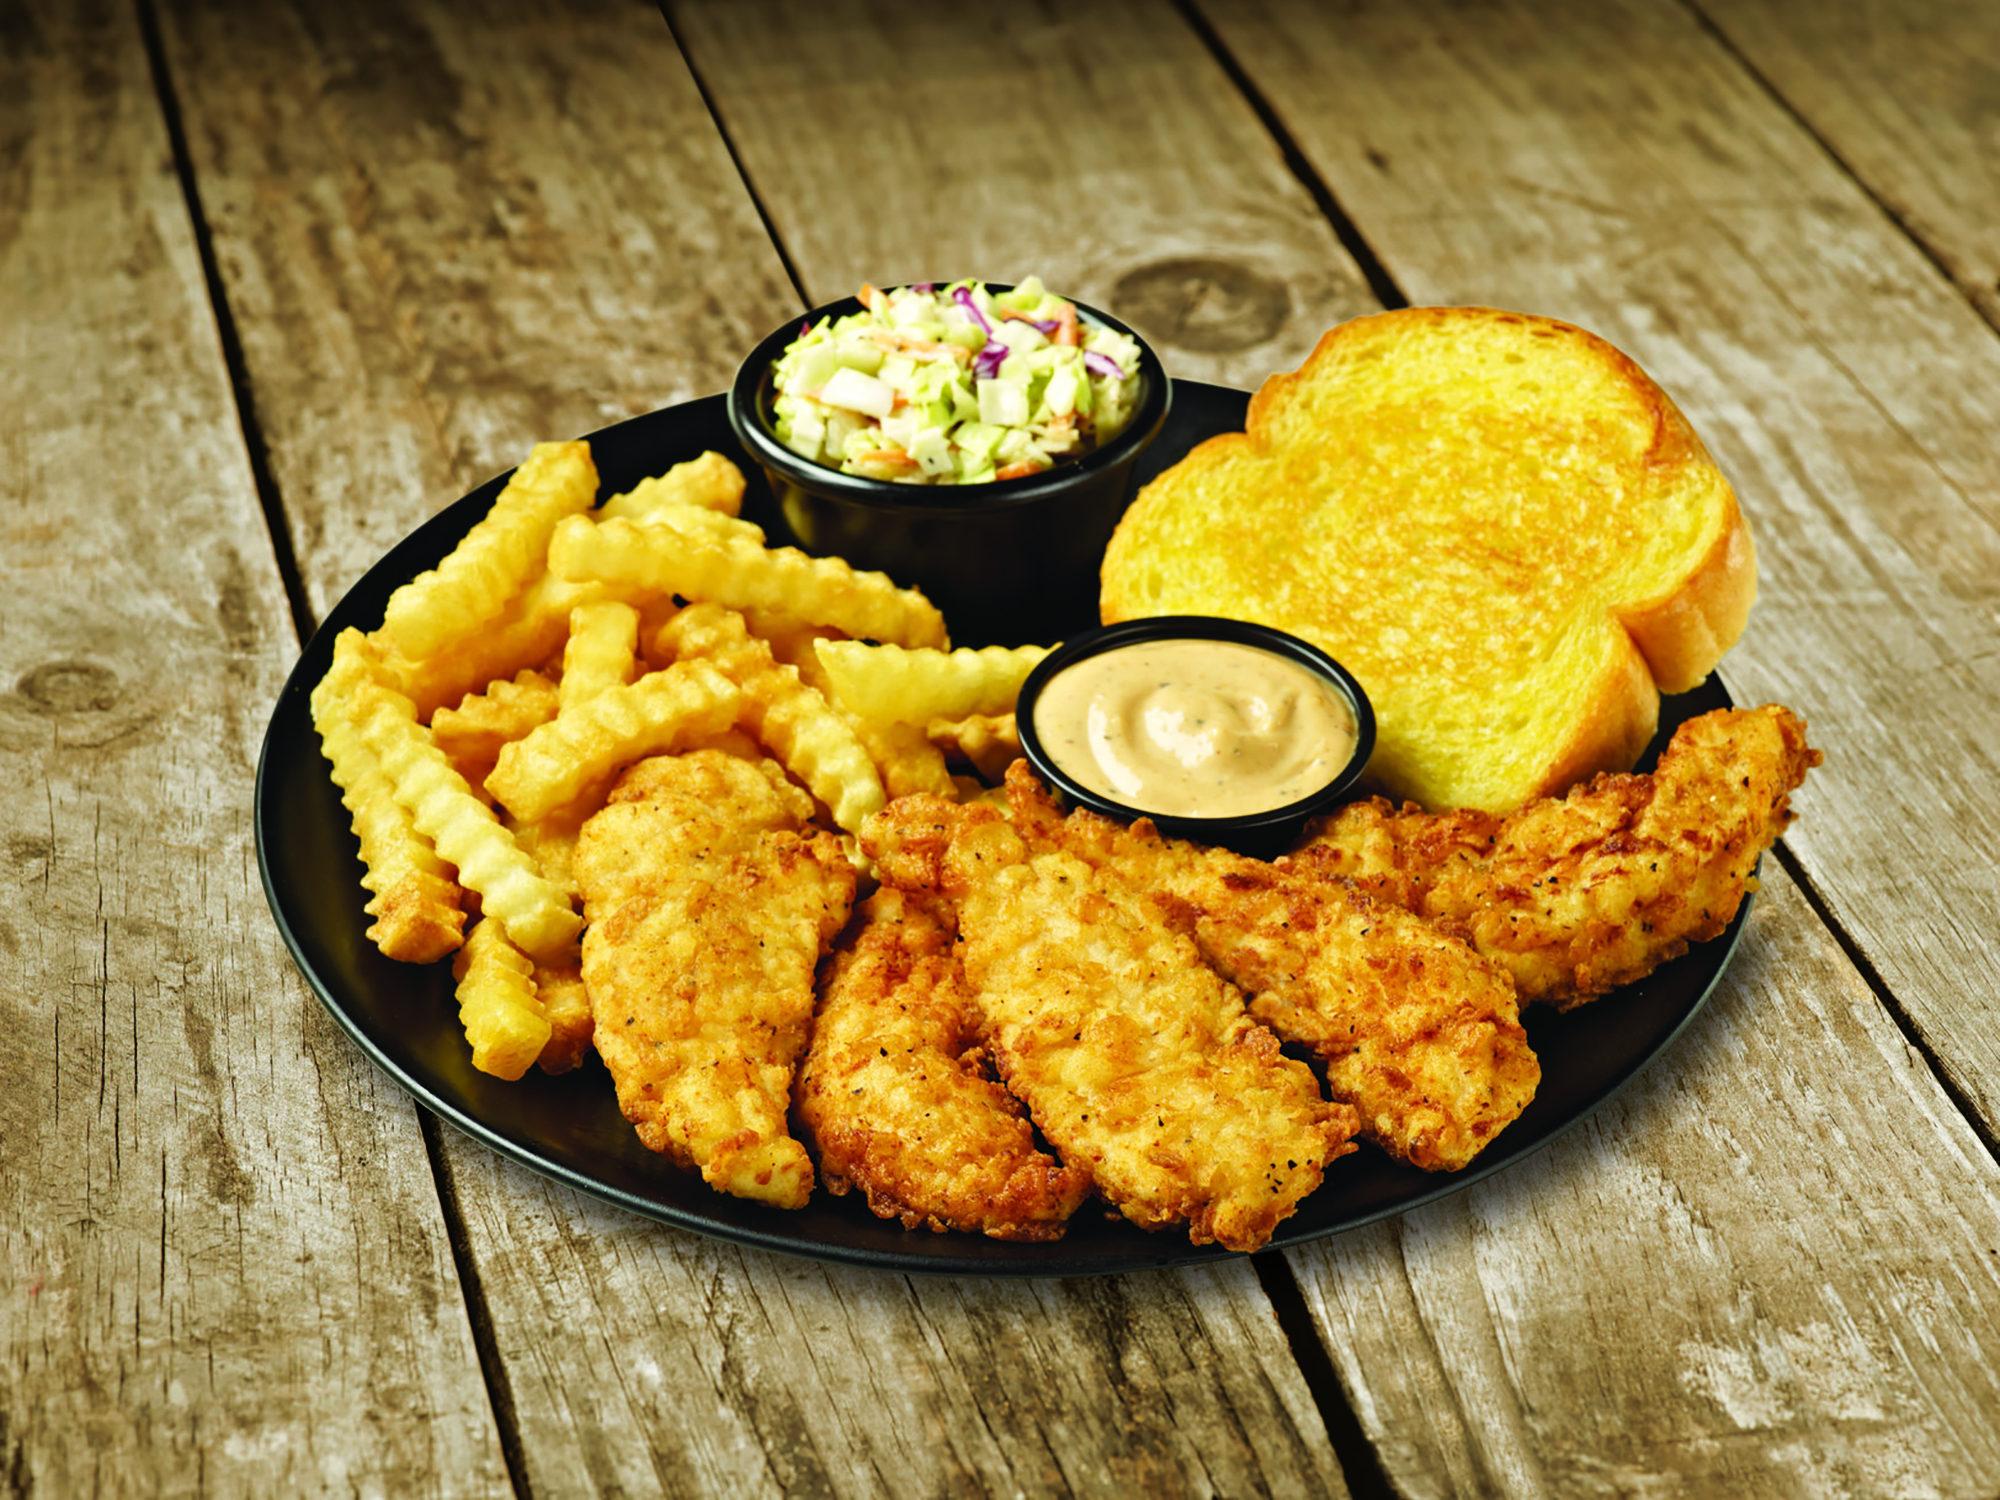 The five-piece chicken tender meal at Huey Magoo’s. The chain has a total of 18 restaurants in Florida, Georgia and Mississippi.